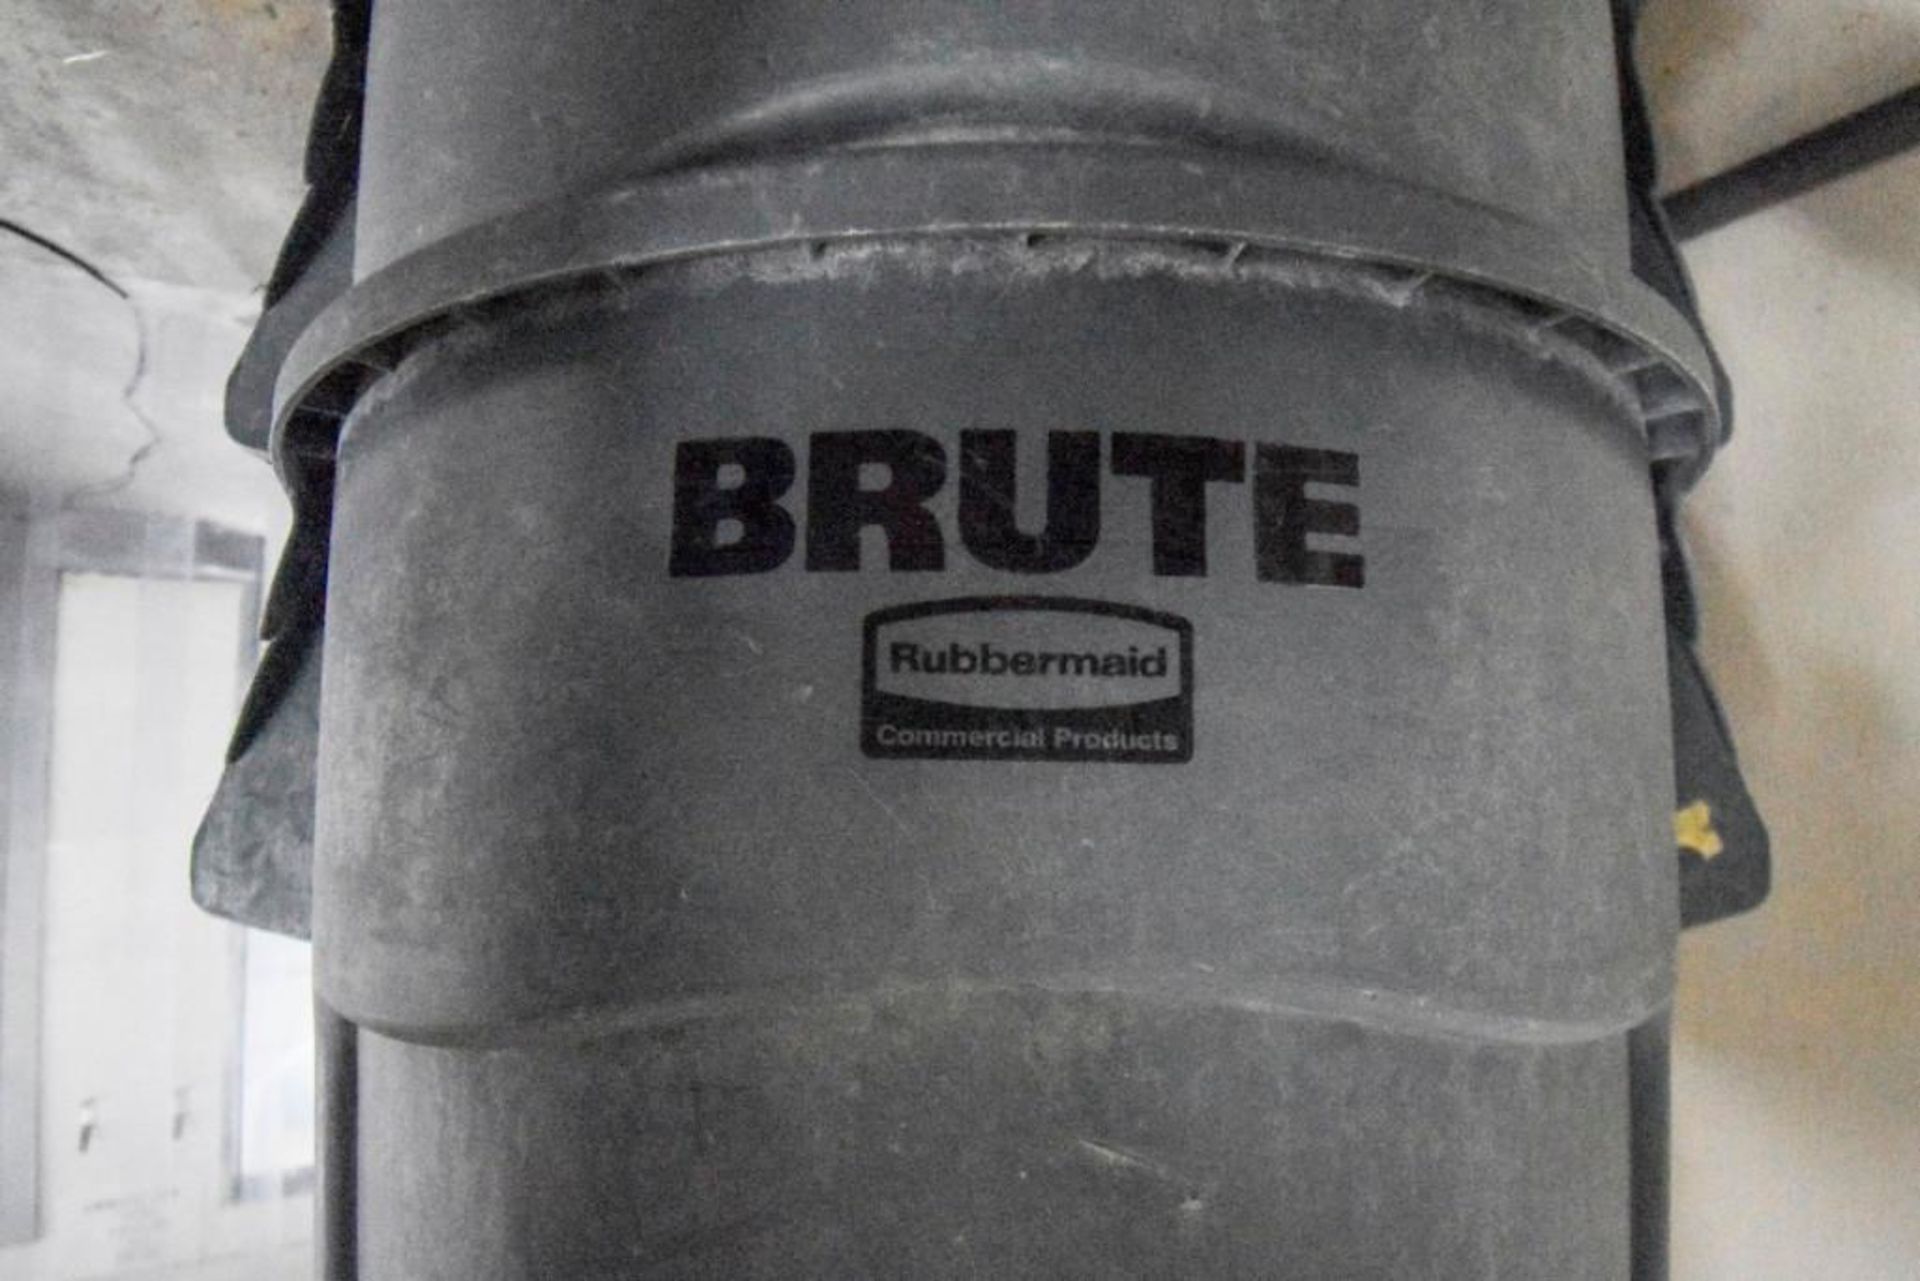 8 Brute Trash Cans - Image 2 of 2